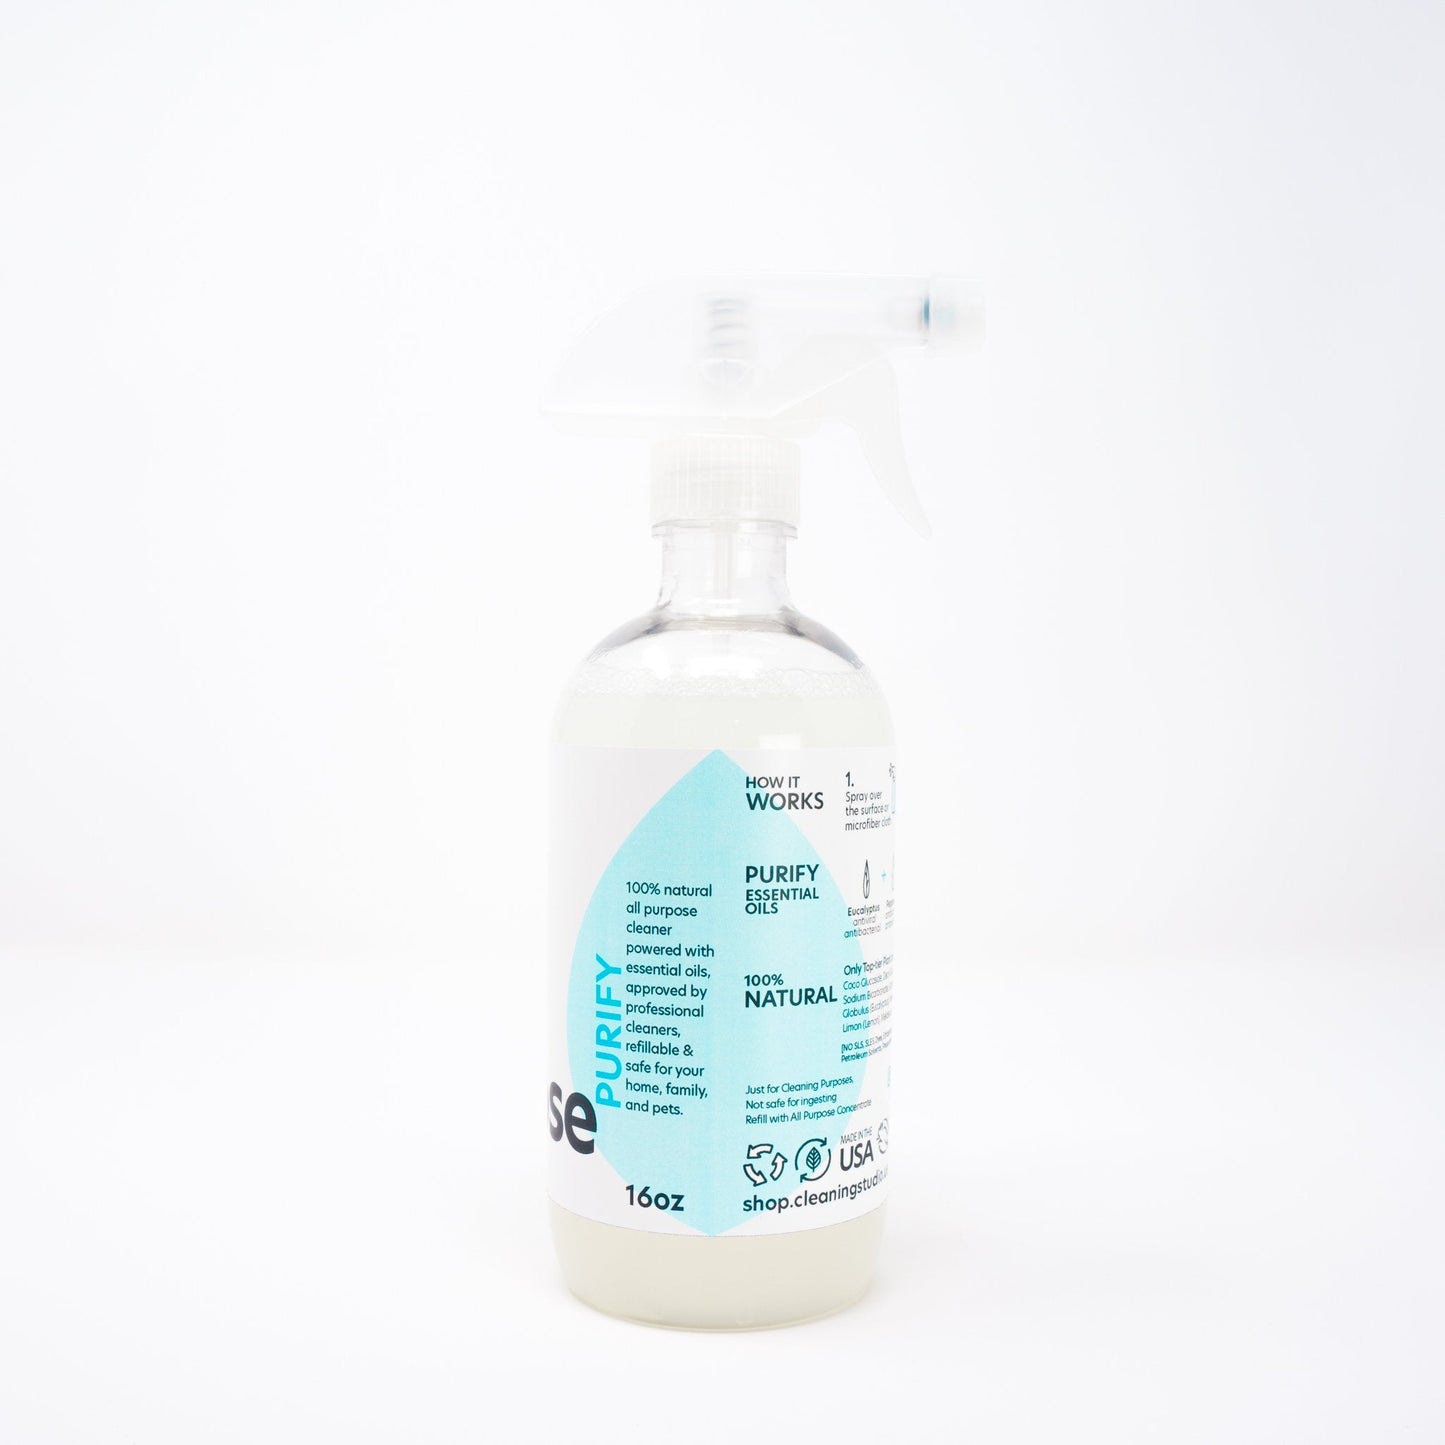 All Purpose Cleaner - Kind Designs